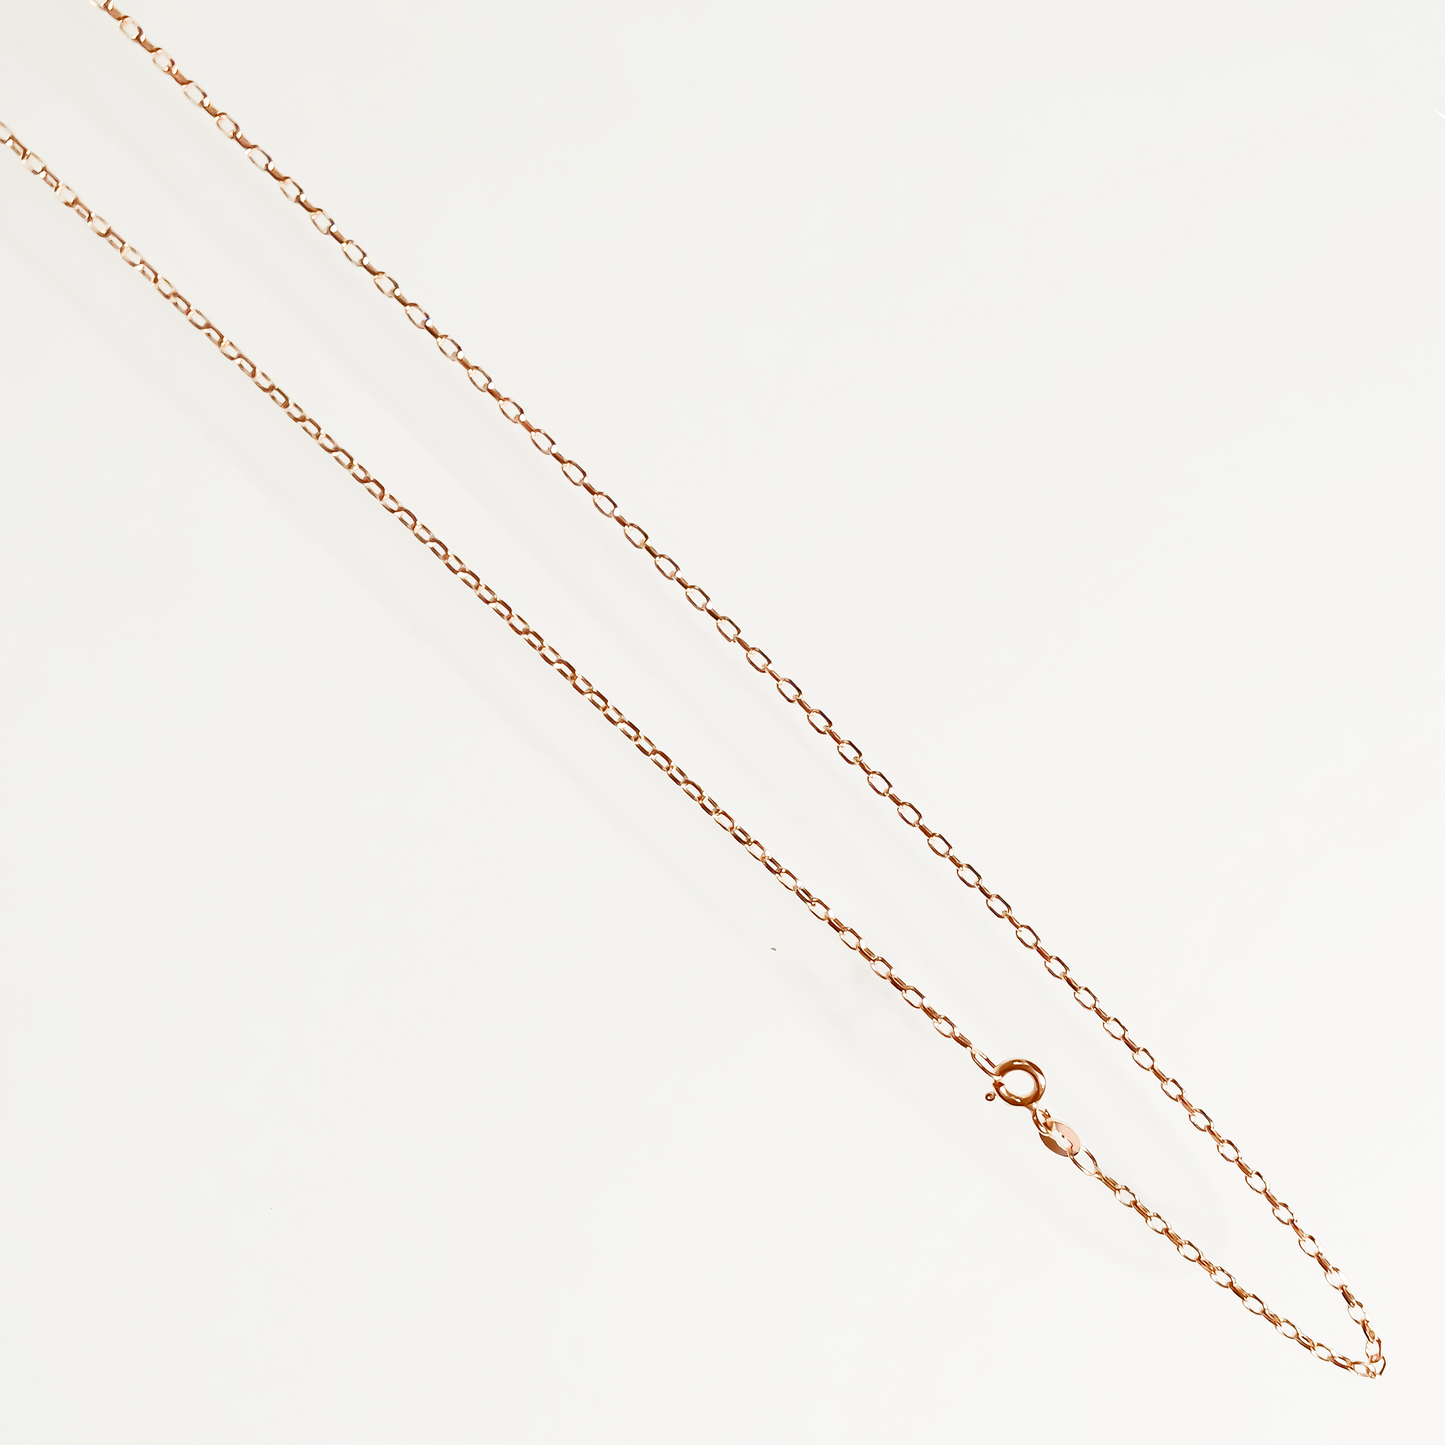 1mm Anchor Link Necklace in 9ct Gold